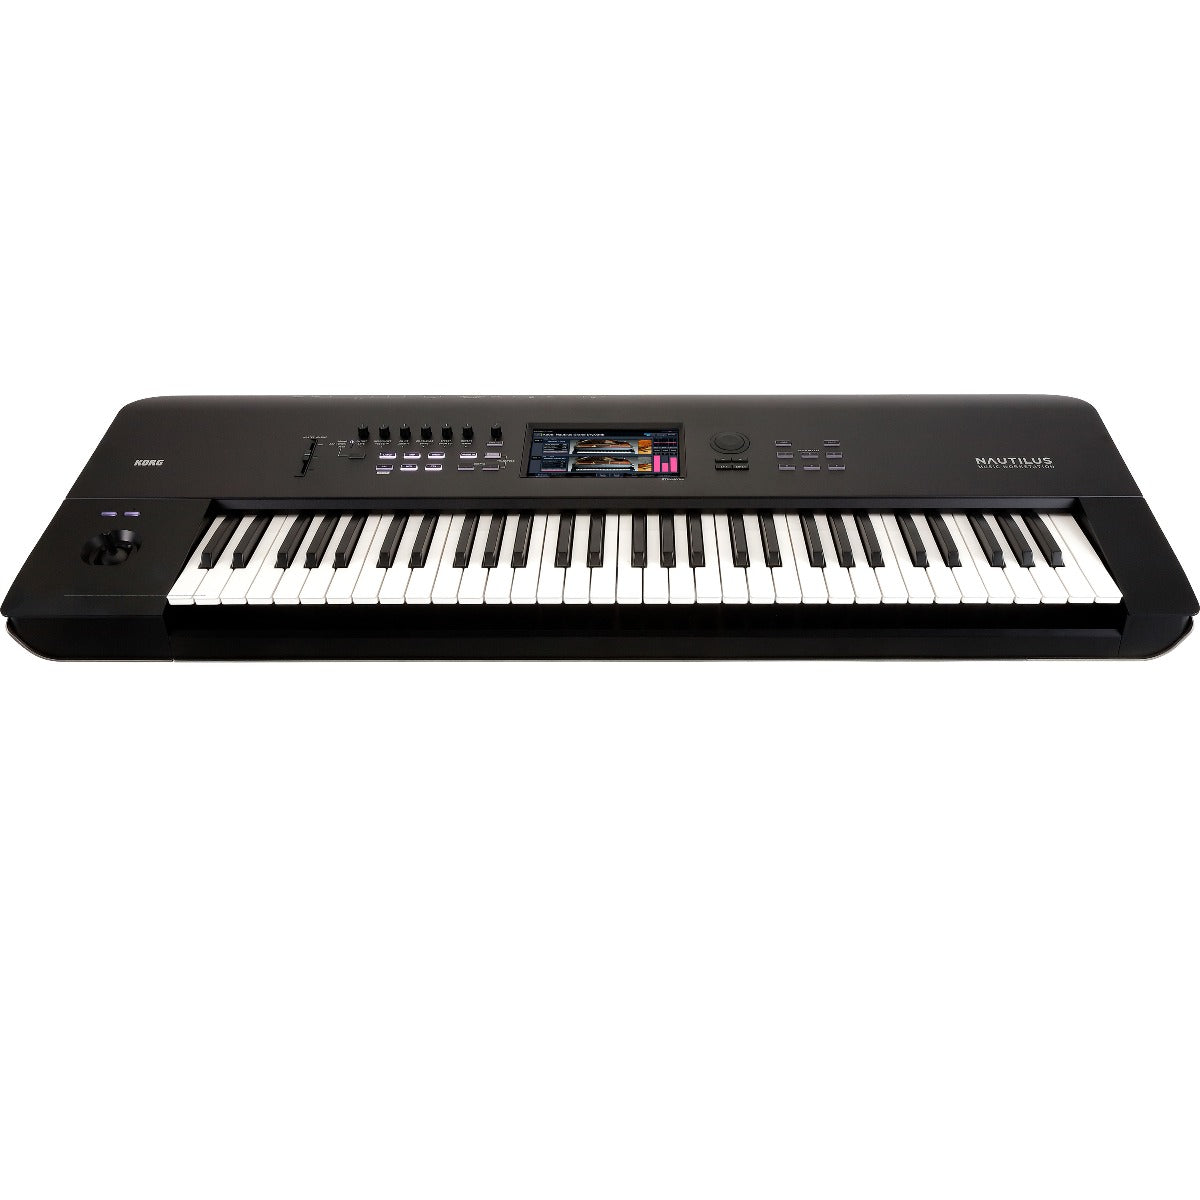 Perspective view of Korg Nautilus 61-Key Music Workstation showing top and front